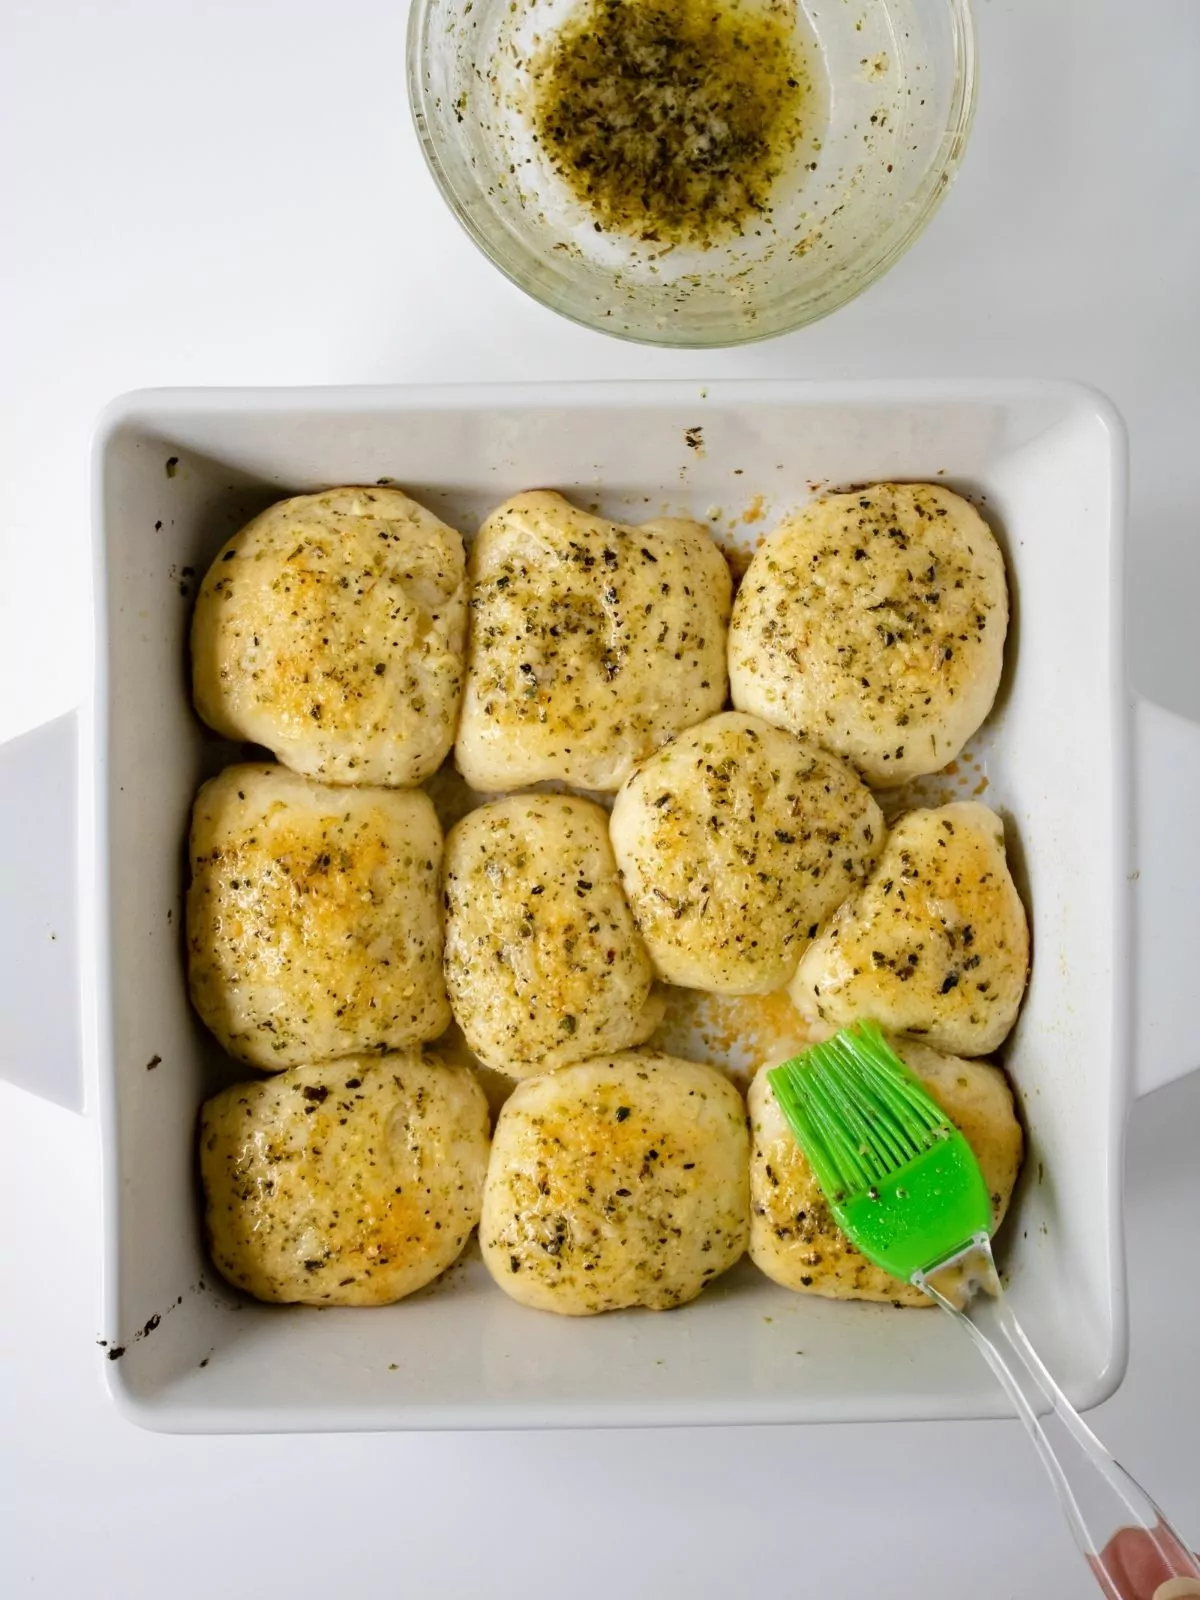 Baked biscuits brushed with melted garlic butter.